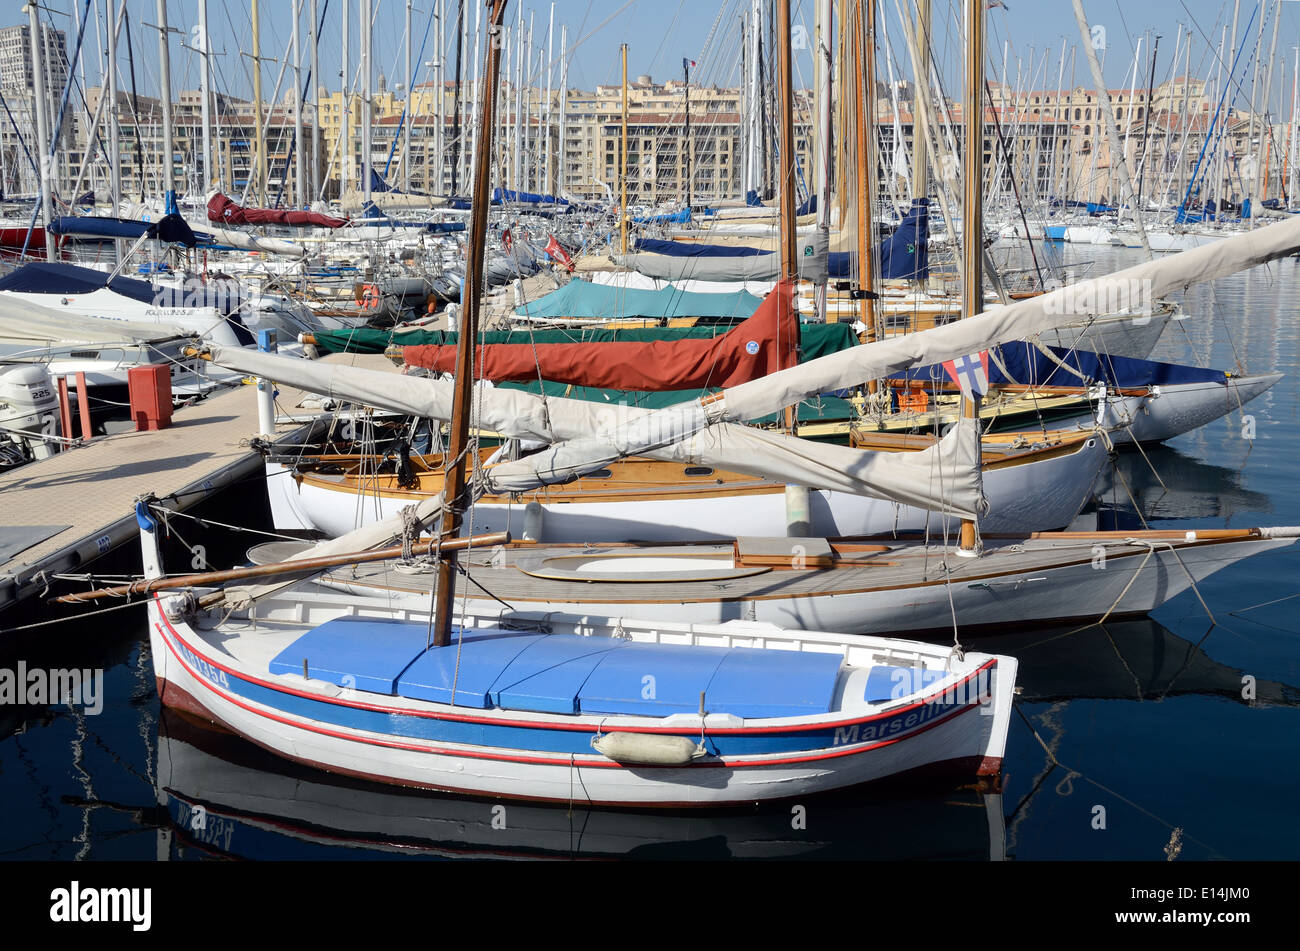 Traditional Wooden Yachts & Small Fishing Boat known as a Barquette Marseillaise Old Port Marseille or Marseilles France Stock Photo